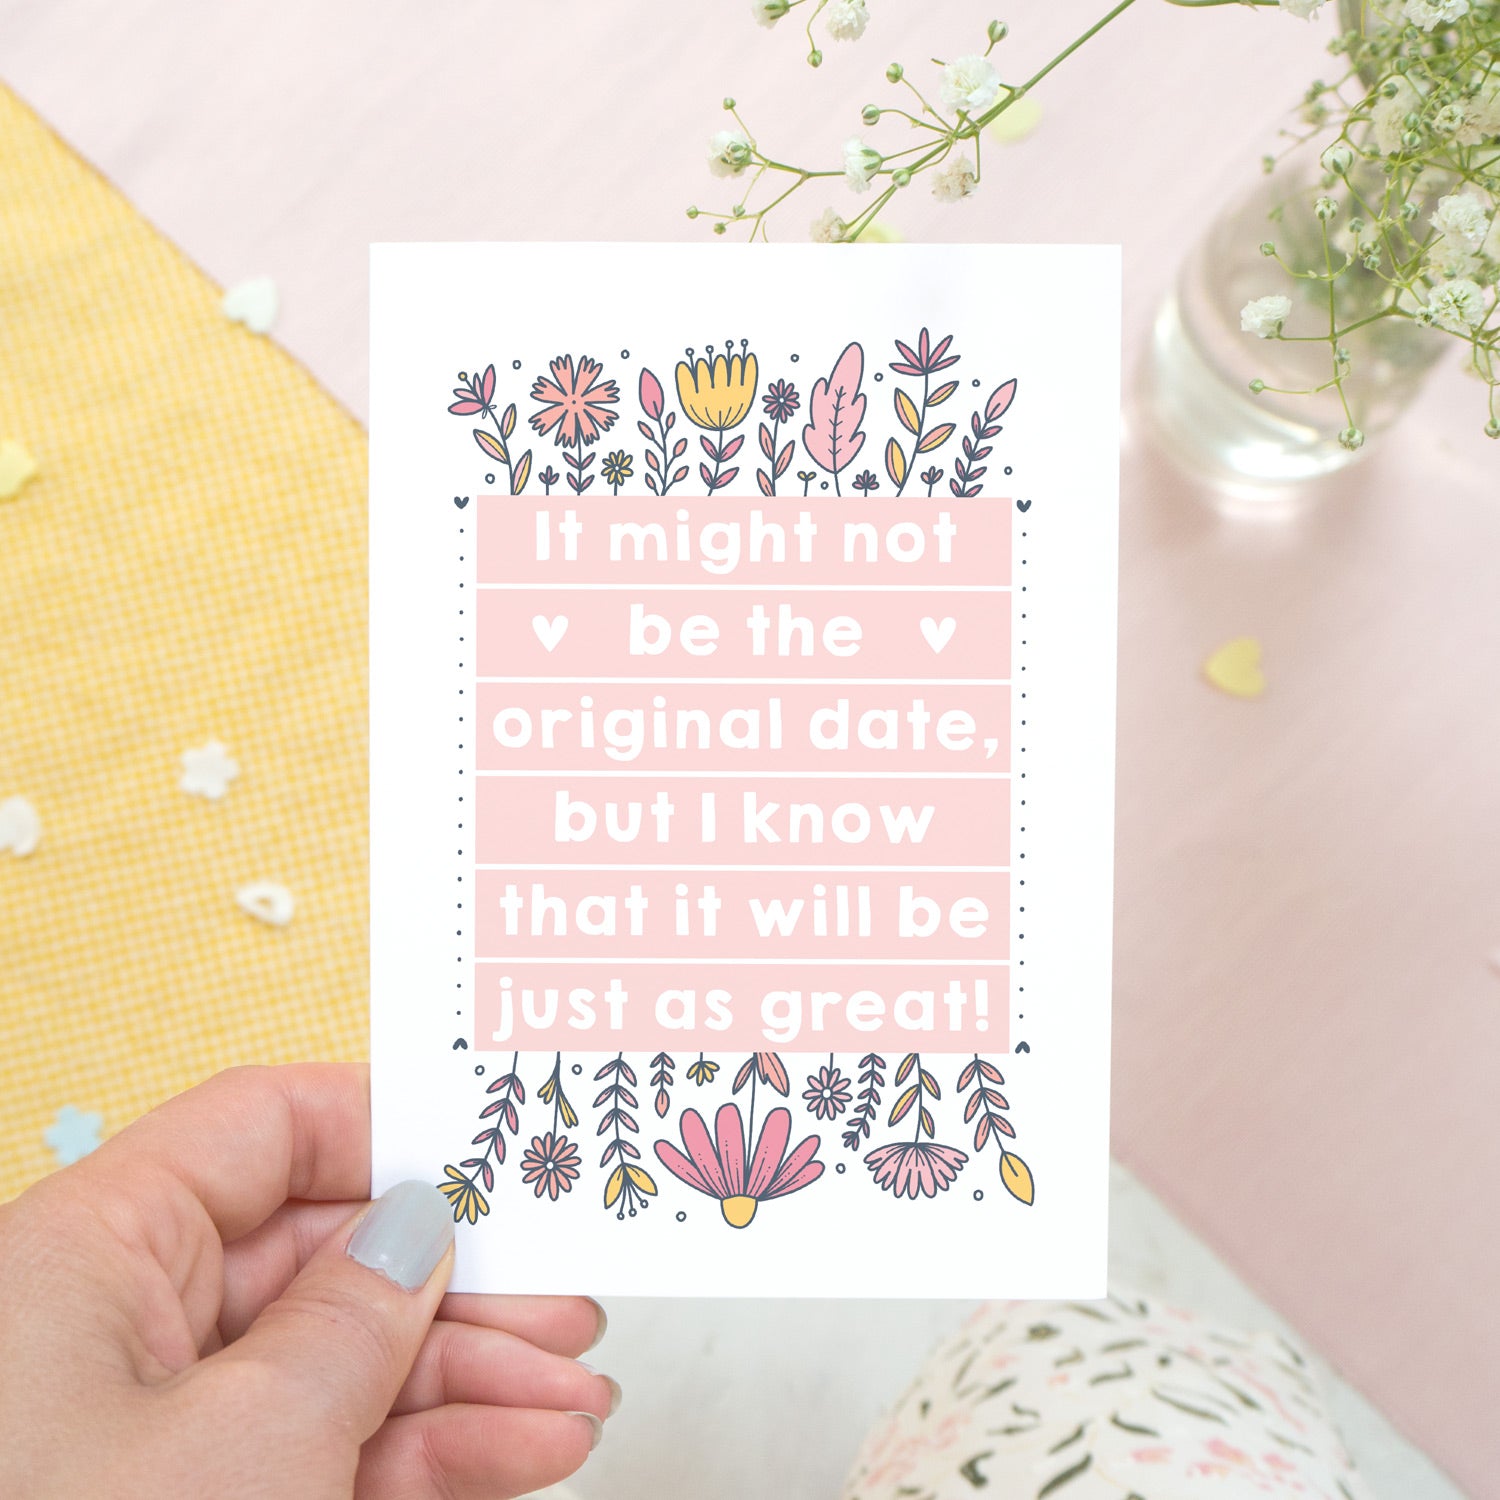 Original wedding date card for wedding postponements or delays. Photographed being held over a white, yellow and pink textured background with a pink pen and hint of foliage. The card features pink block of text and hand drawn florals.